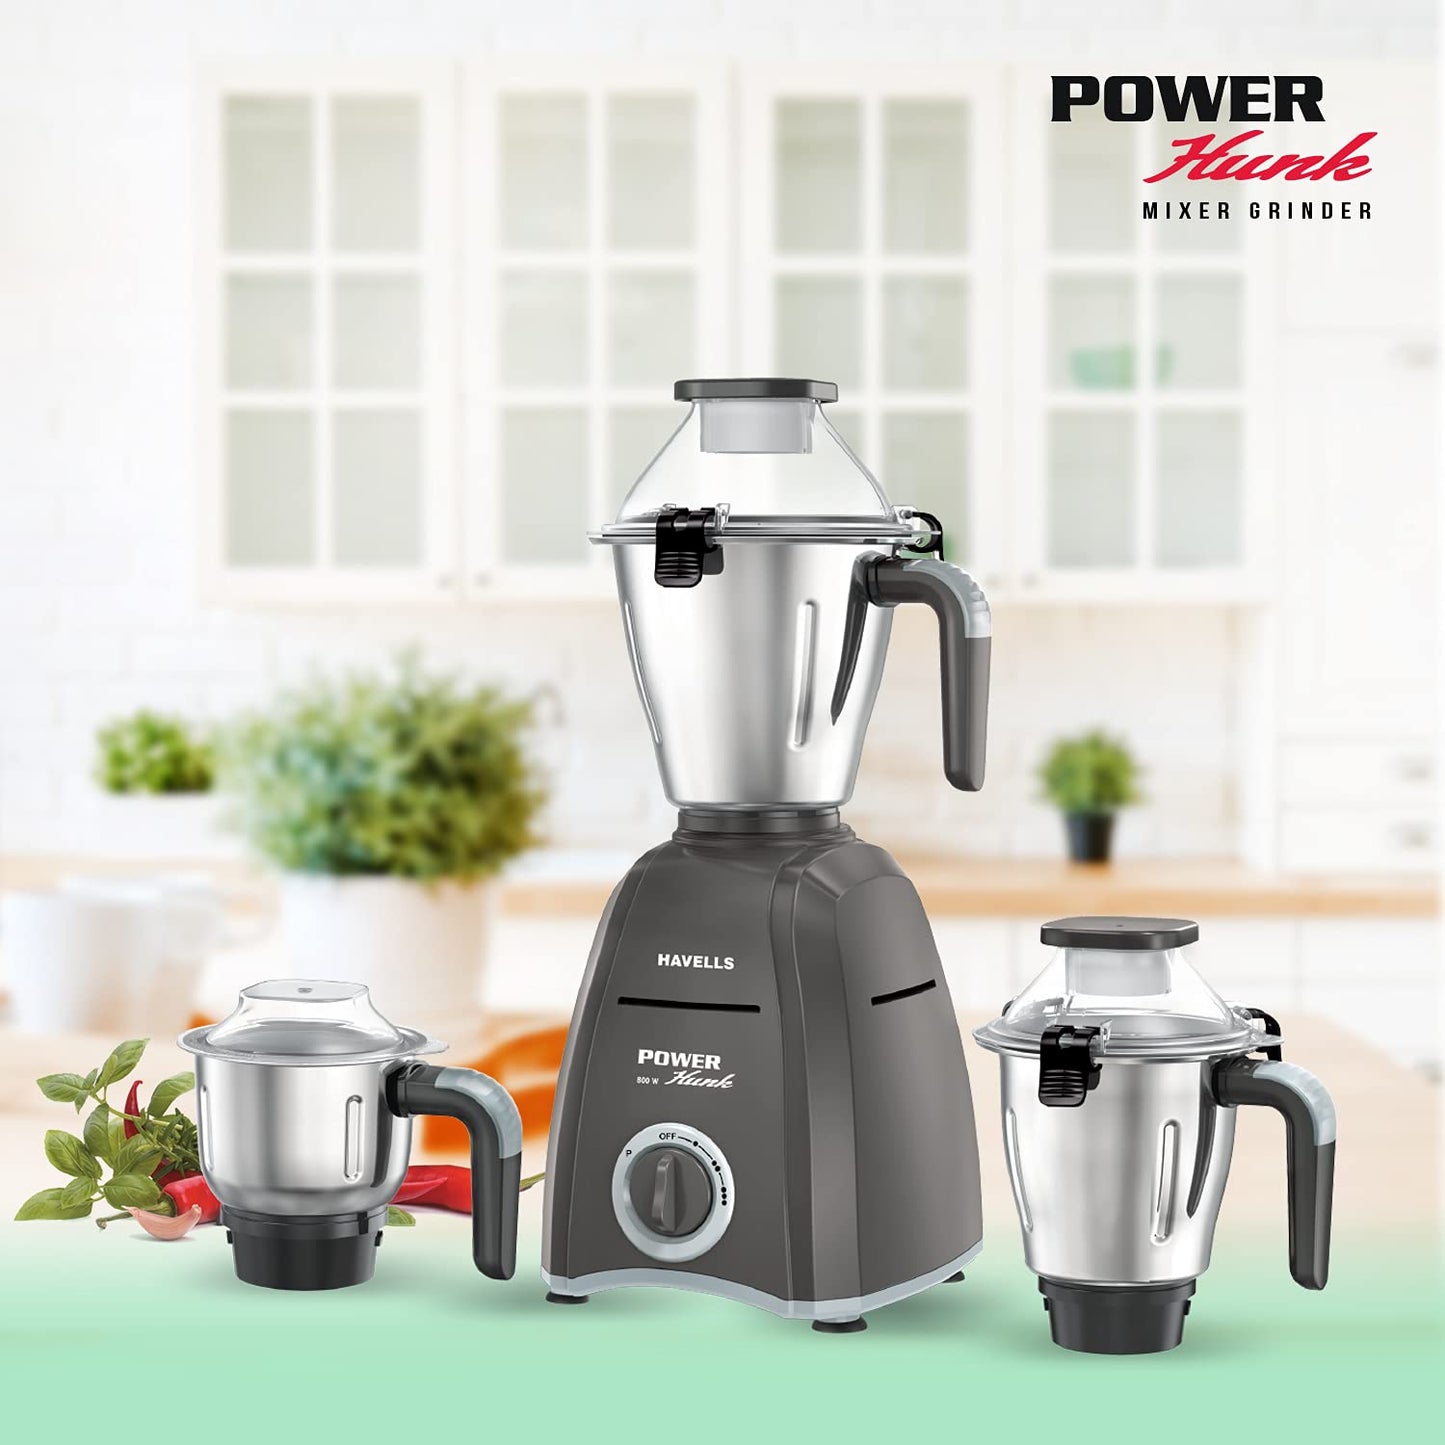 Havells Power Hunk 800 watt Mixer Grinder with 3 Wider mouth Stainless Steel Jar, Hands Free operation, SS-304 Grade Blade & 7 year motor warranty (Grey)